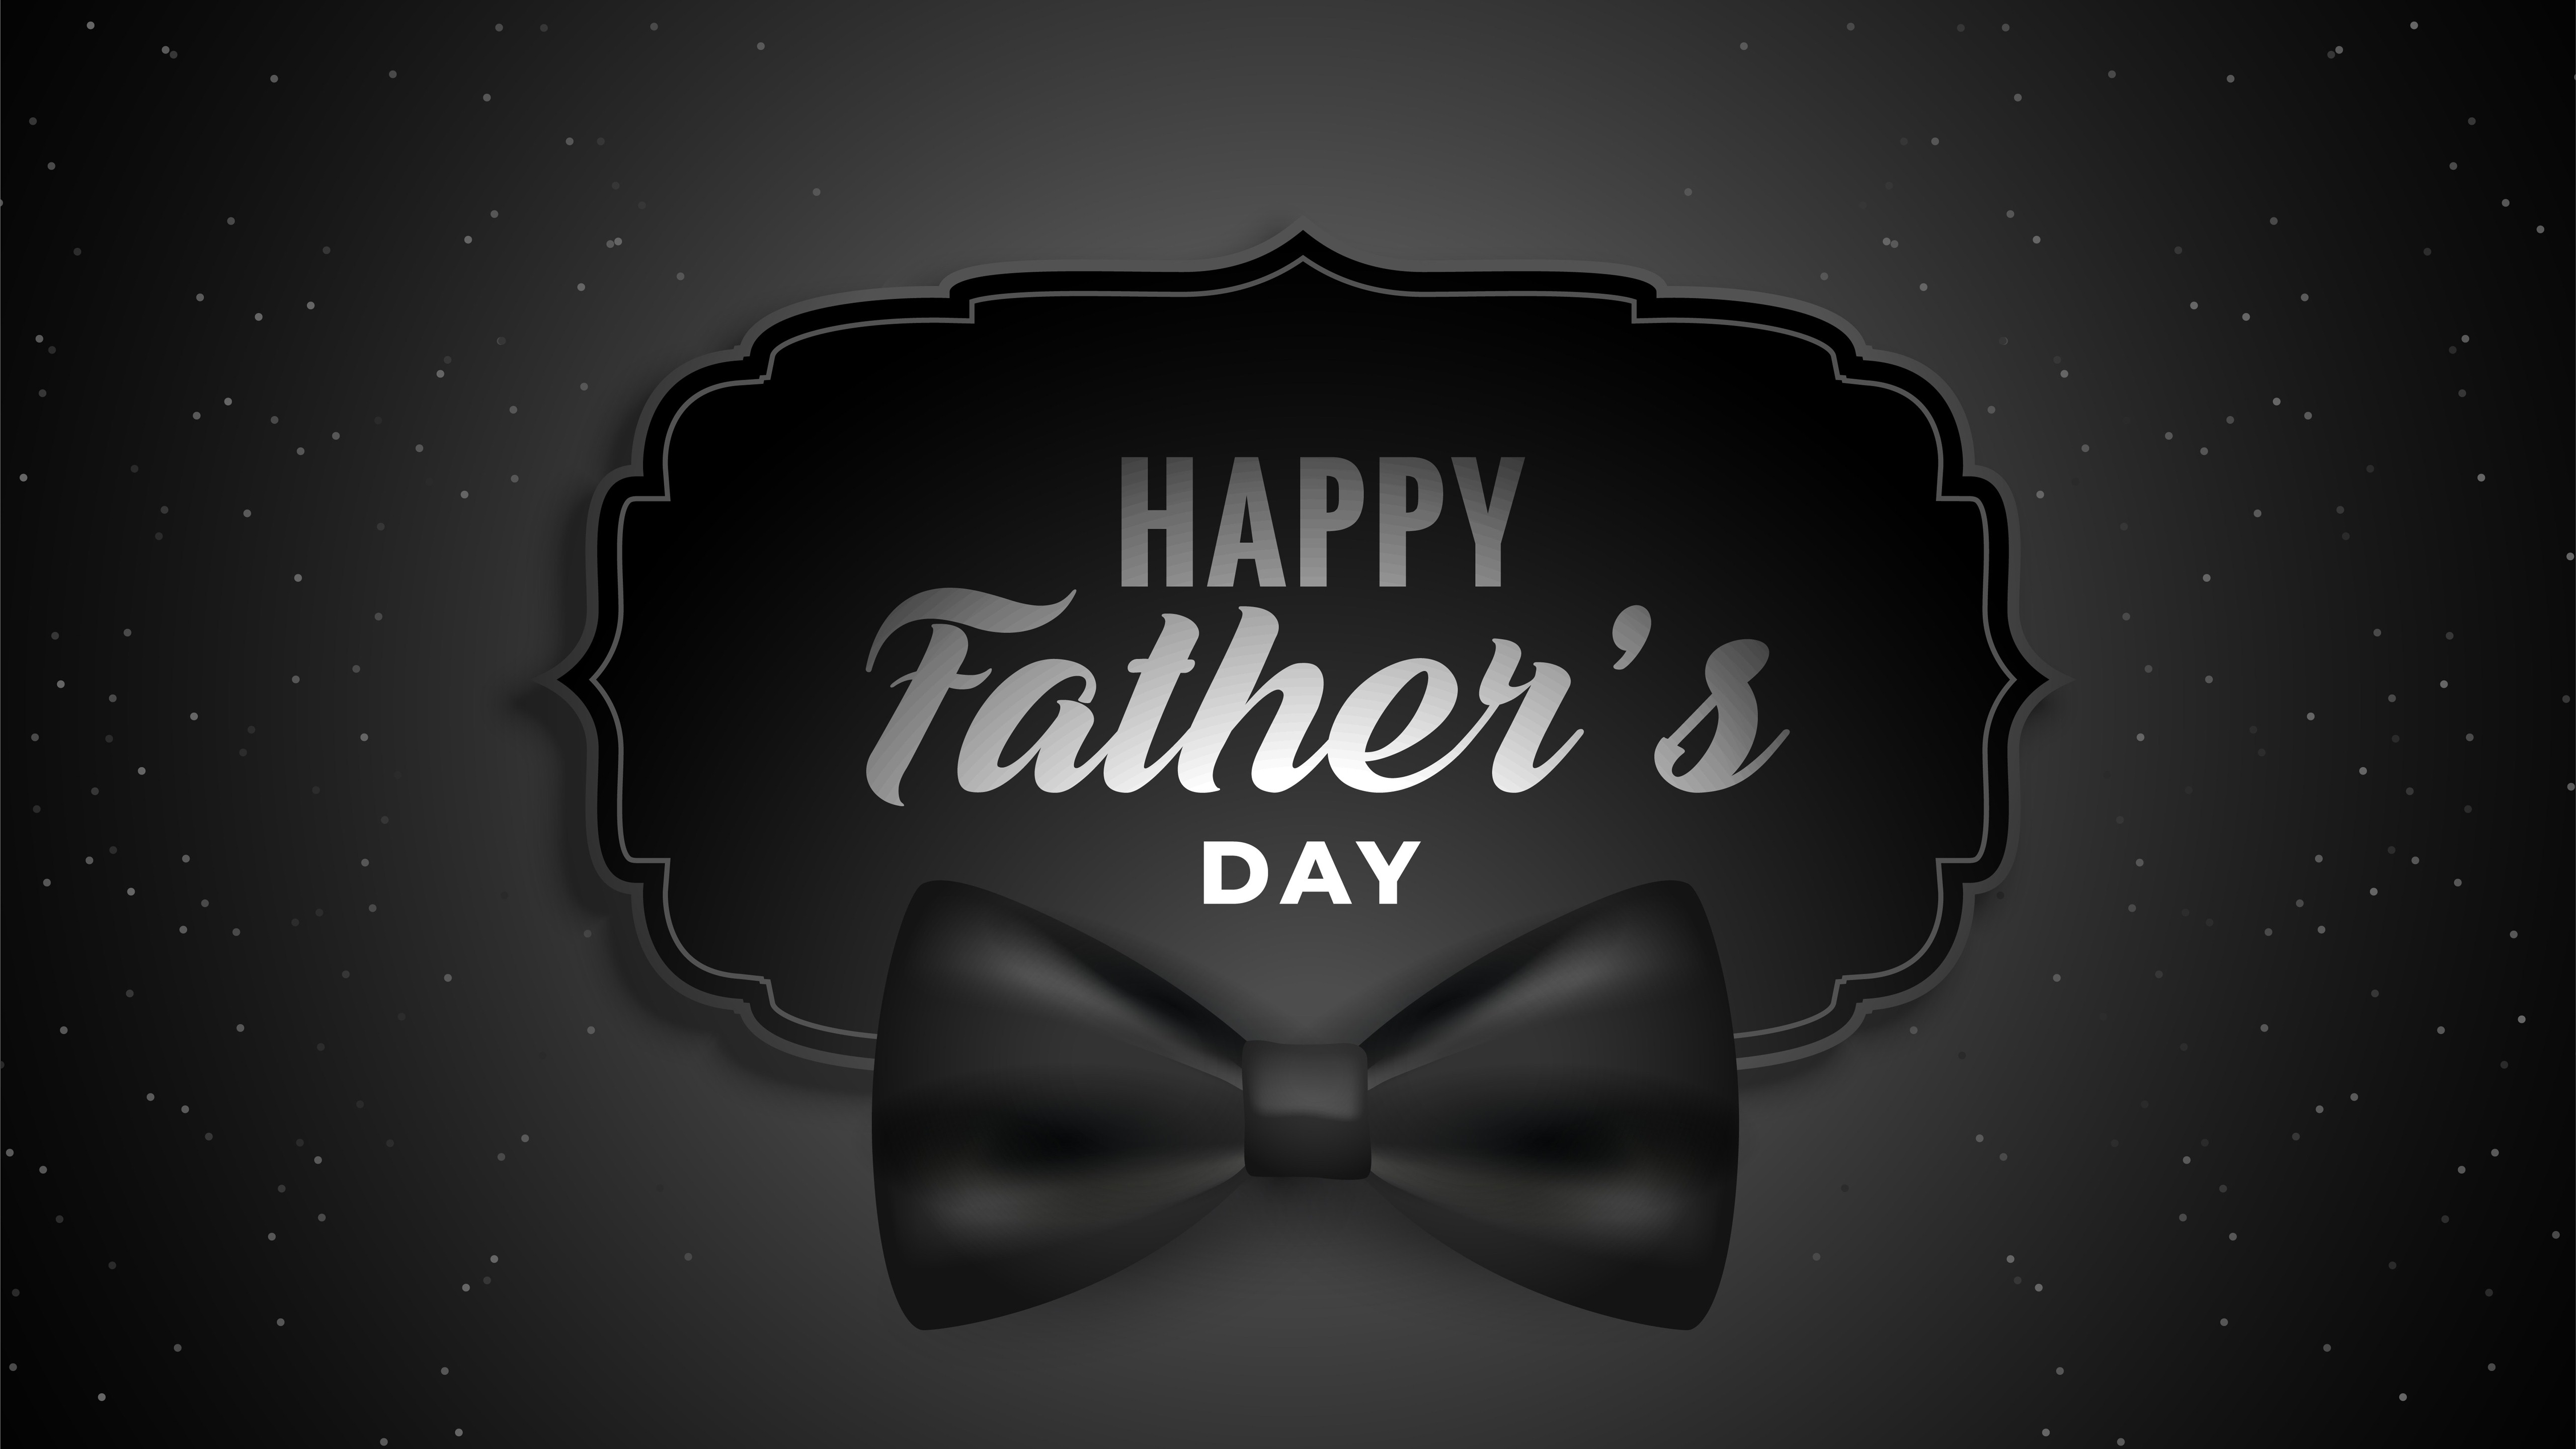 Free download Happy Fathers Day Black Background 5K Photo HD Wallpapers